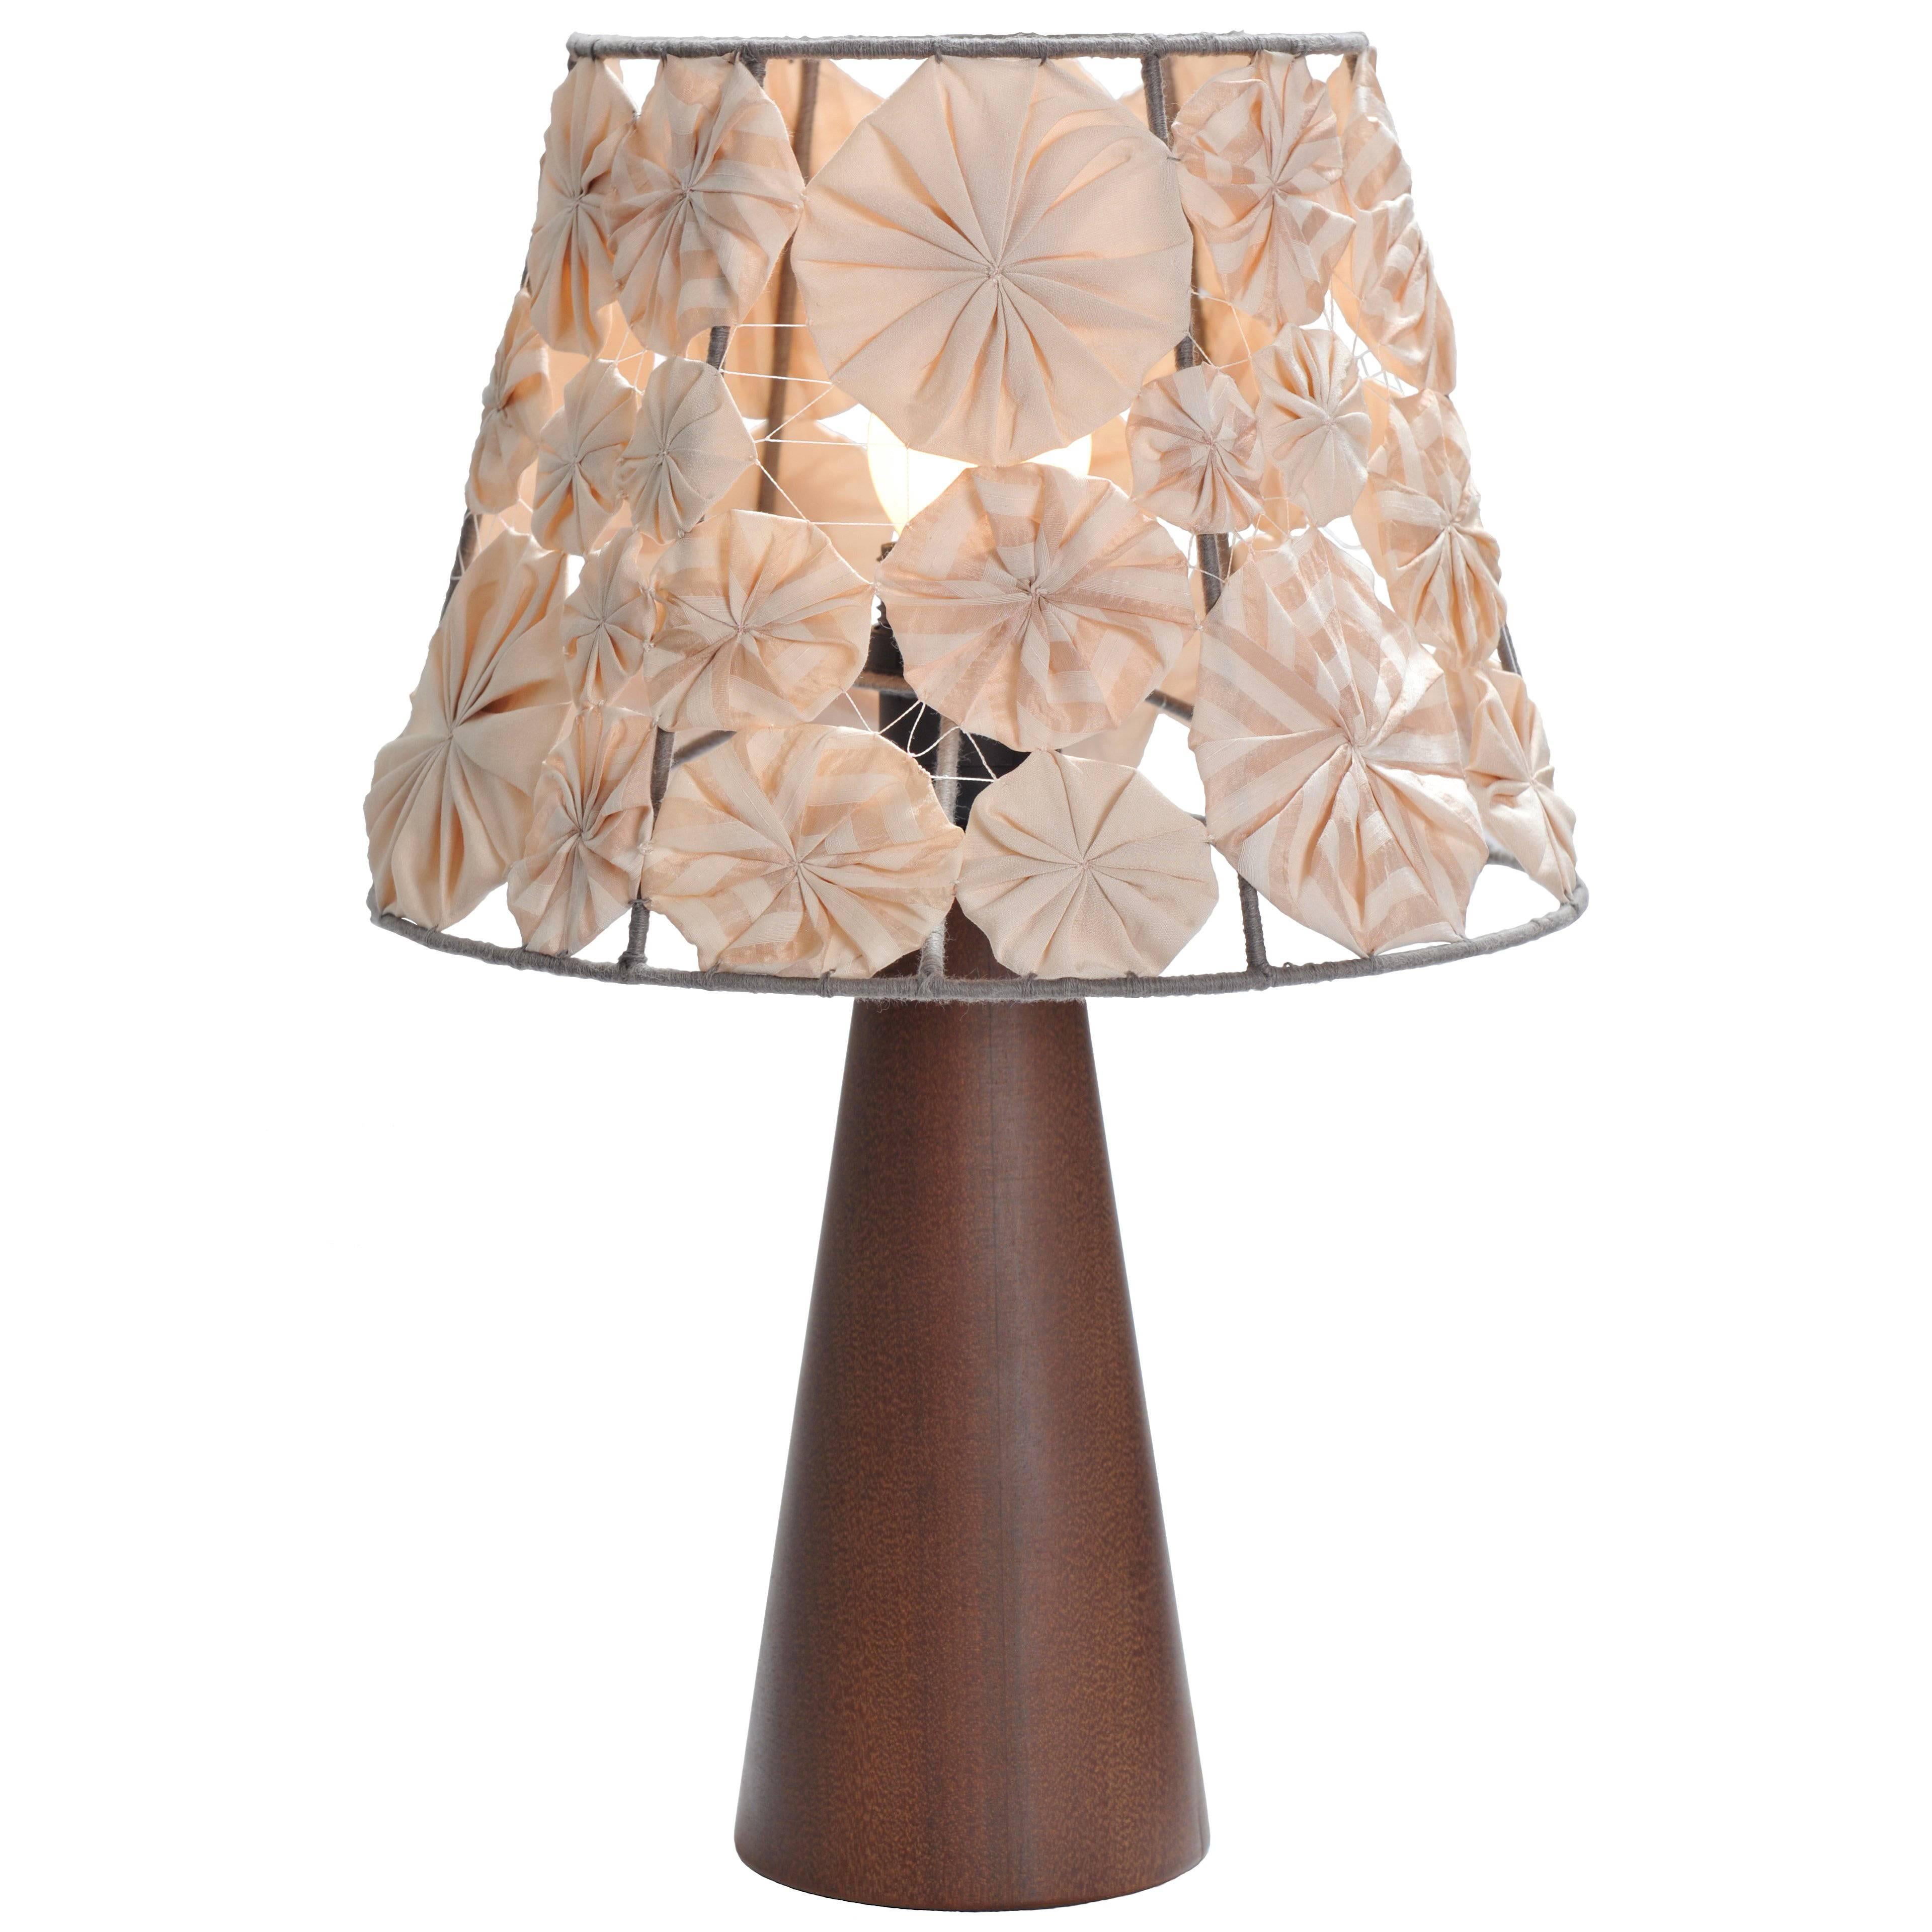 'Ipe' Table Lamp in Wood with Yoyo Shade, Brazilian Contemporary Design